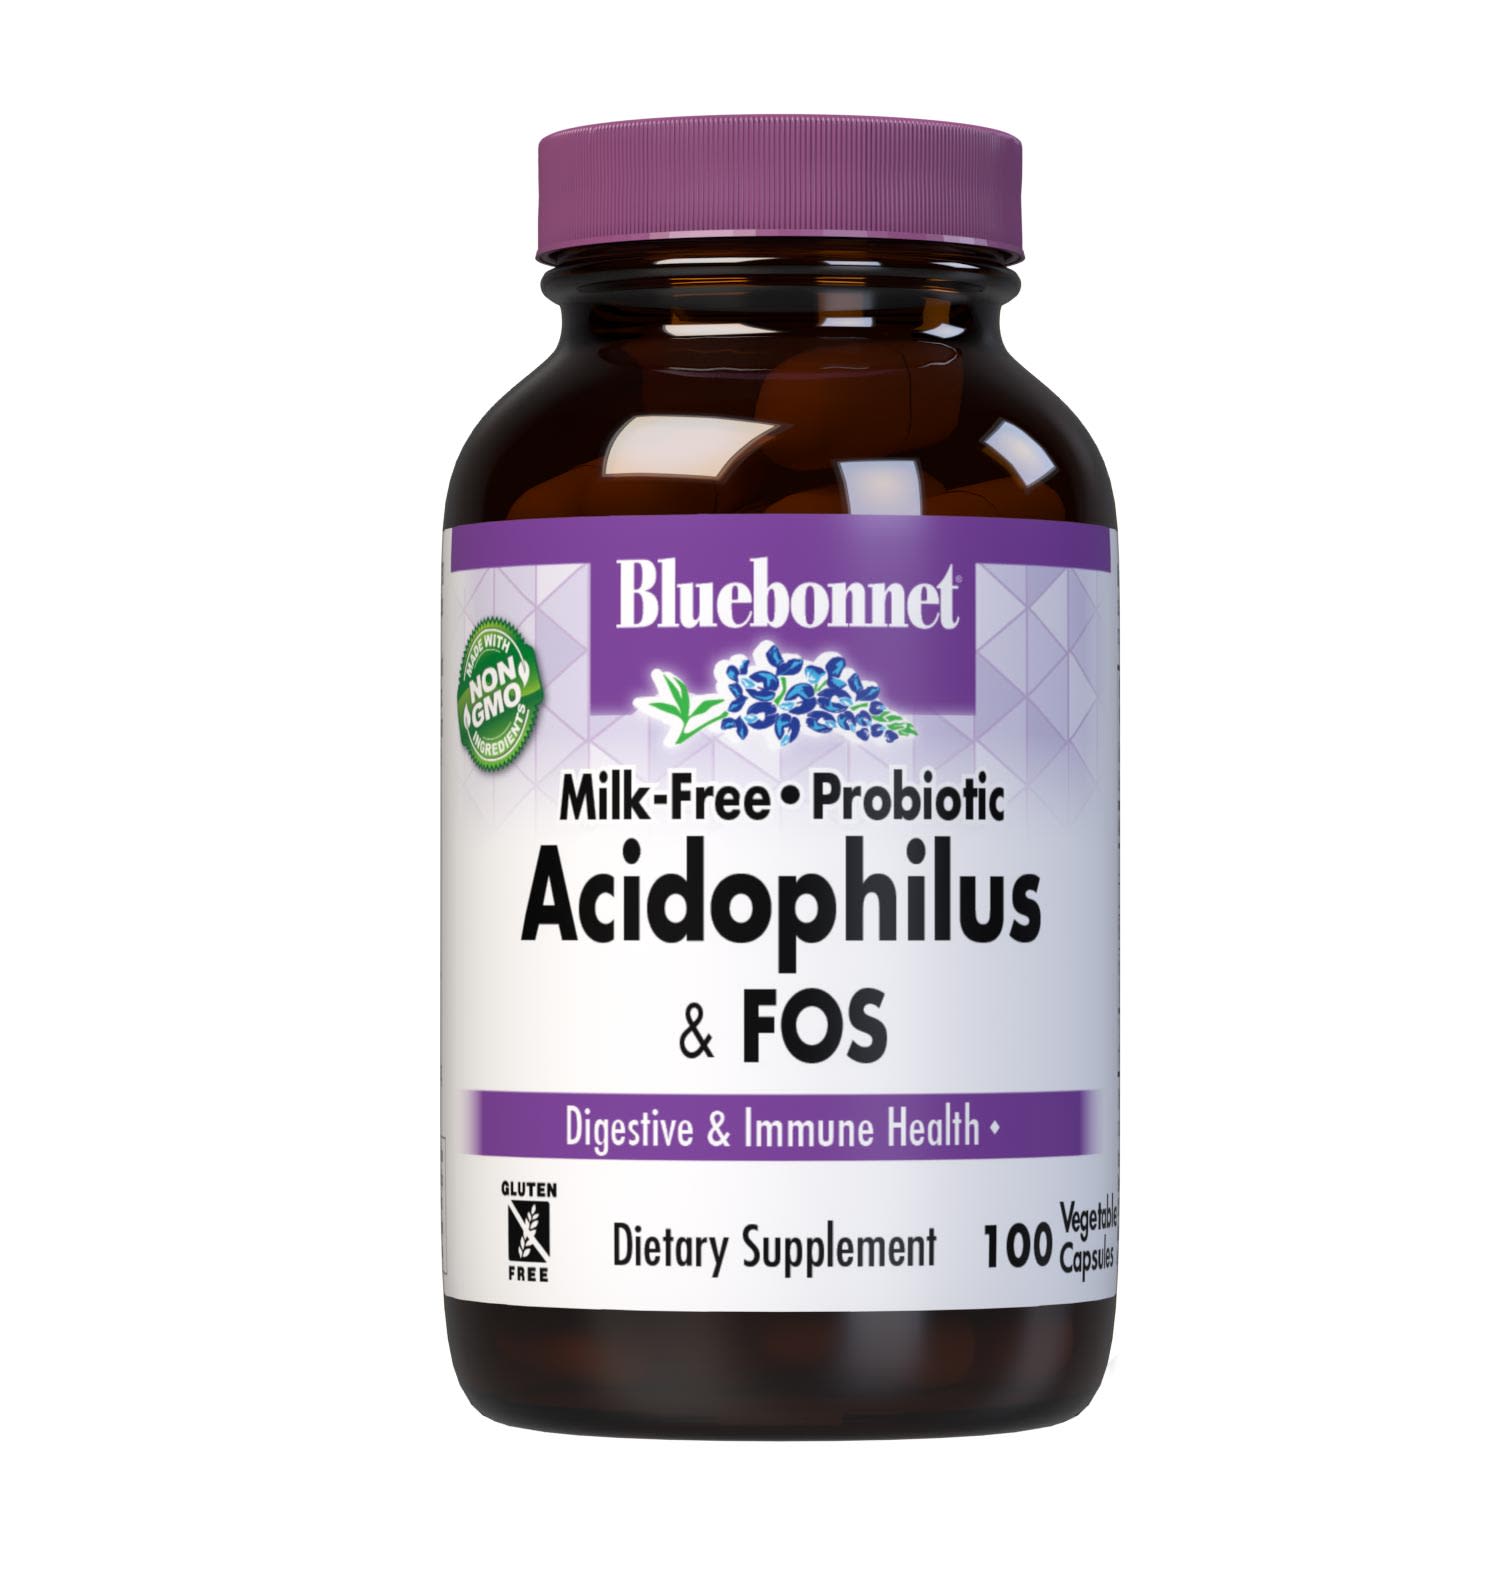 Bluebonnet’s Milk-Free Probiotic Acidophilus & FOS 100 Vegetable Capsules are formulated with over three billion viable cultures from lactobacillus acidophilus, lactobacillus bulgaricus, bifidobacterium bifidum strains along with FOS (fructooligosaccharides) from chicory root extract. This probiotic formula is designed to assist the growth of friendly bacteria in the gut to help support digestive and immune health. #size_100 count